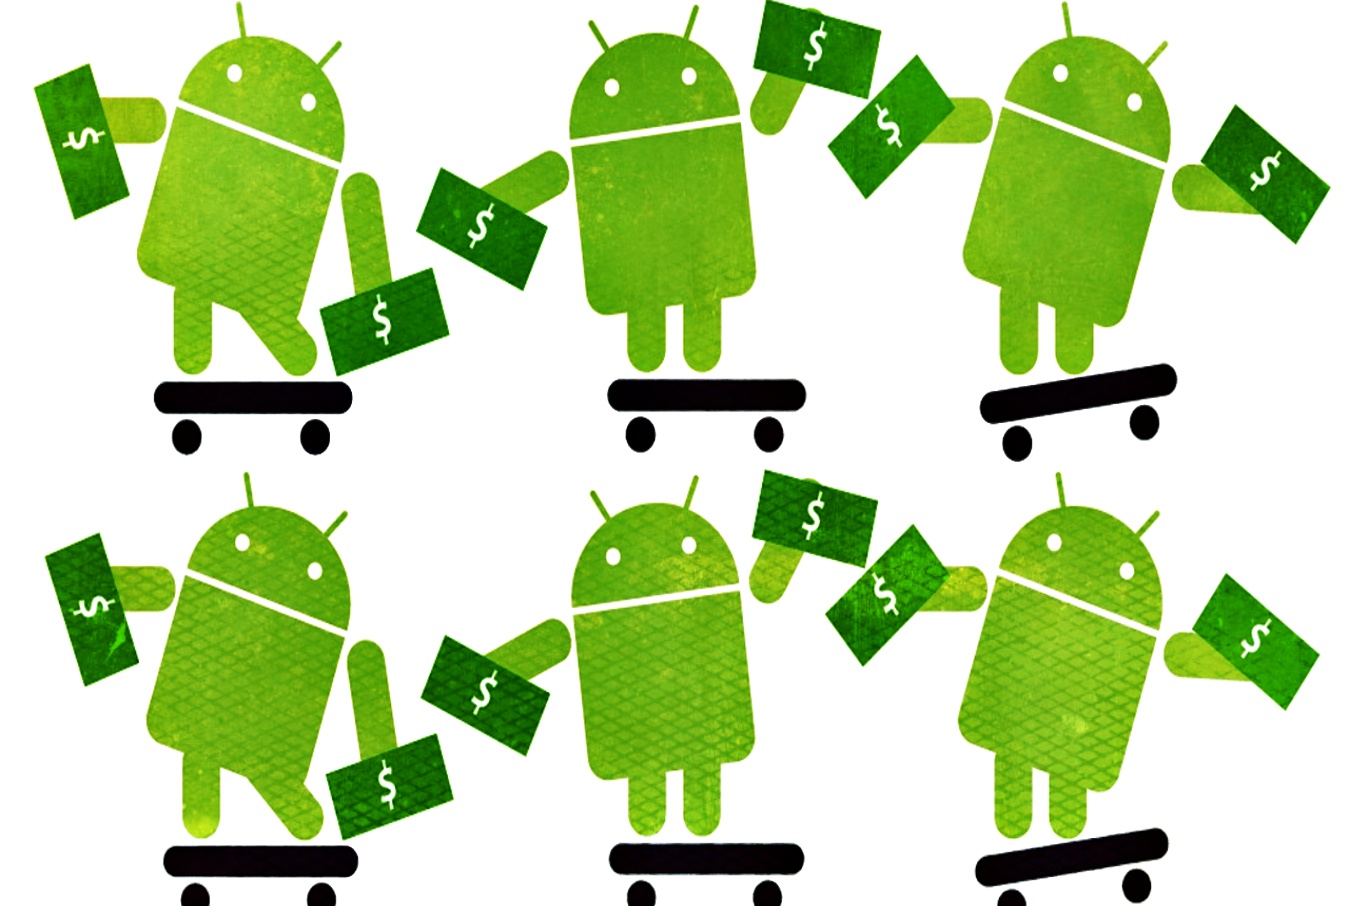 Popular Android apps on Play Store caught defrauding users